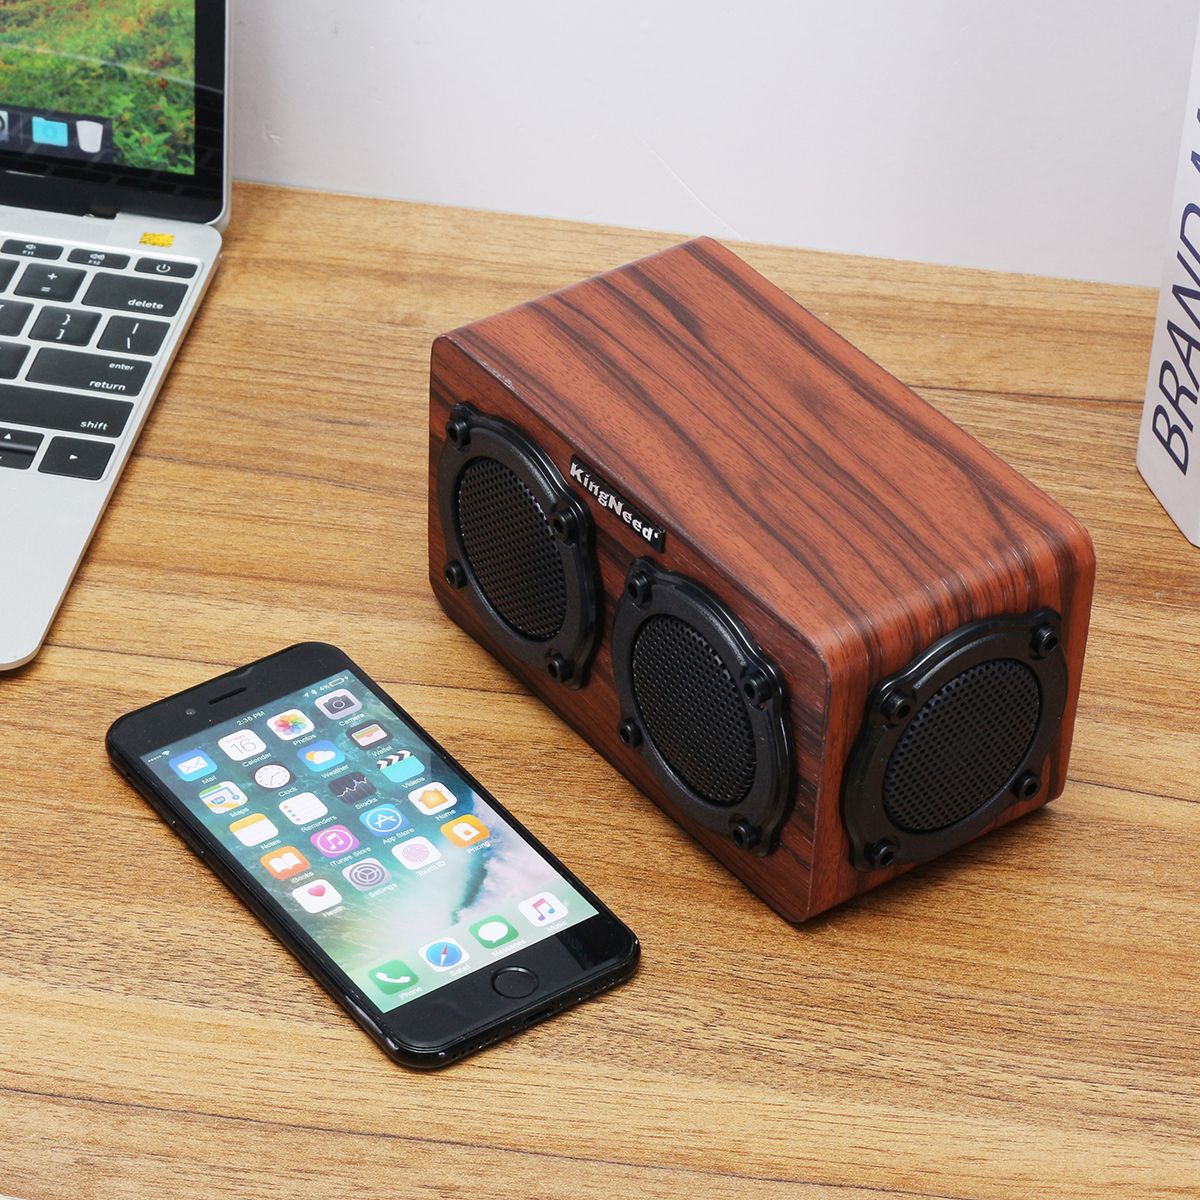 Kingneed-S403-HiFi-Wooden-Wireless-bluetooth-Speaker-Portable-Stereo-Outdoors-Subwoofer-with-Mic-1303996